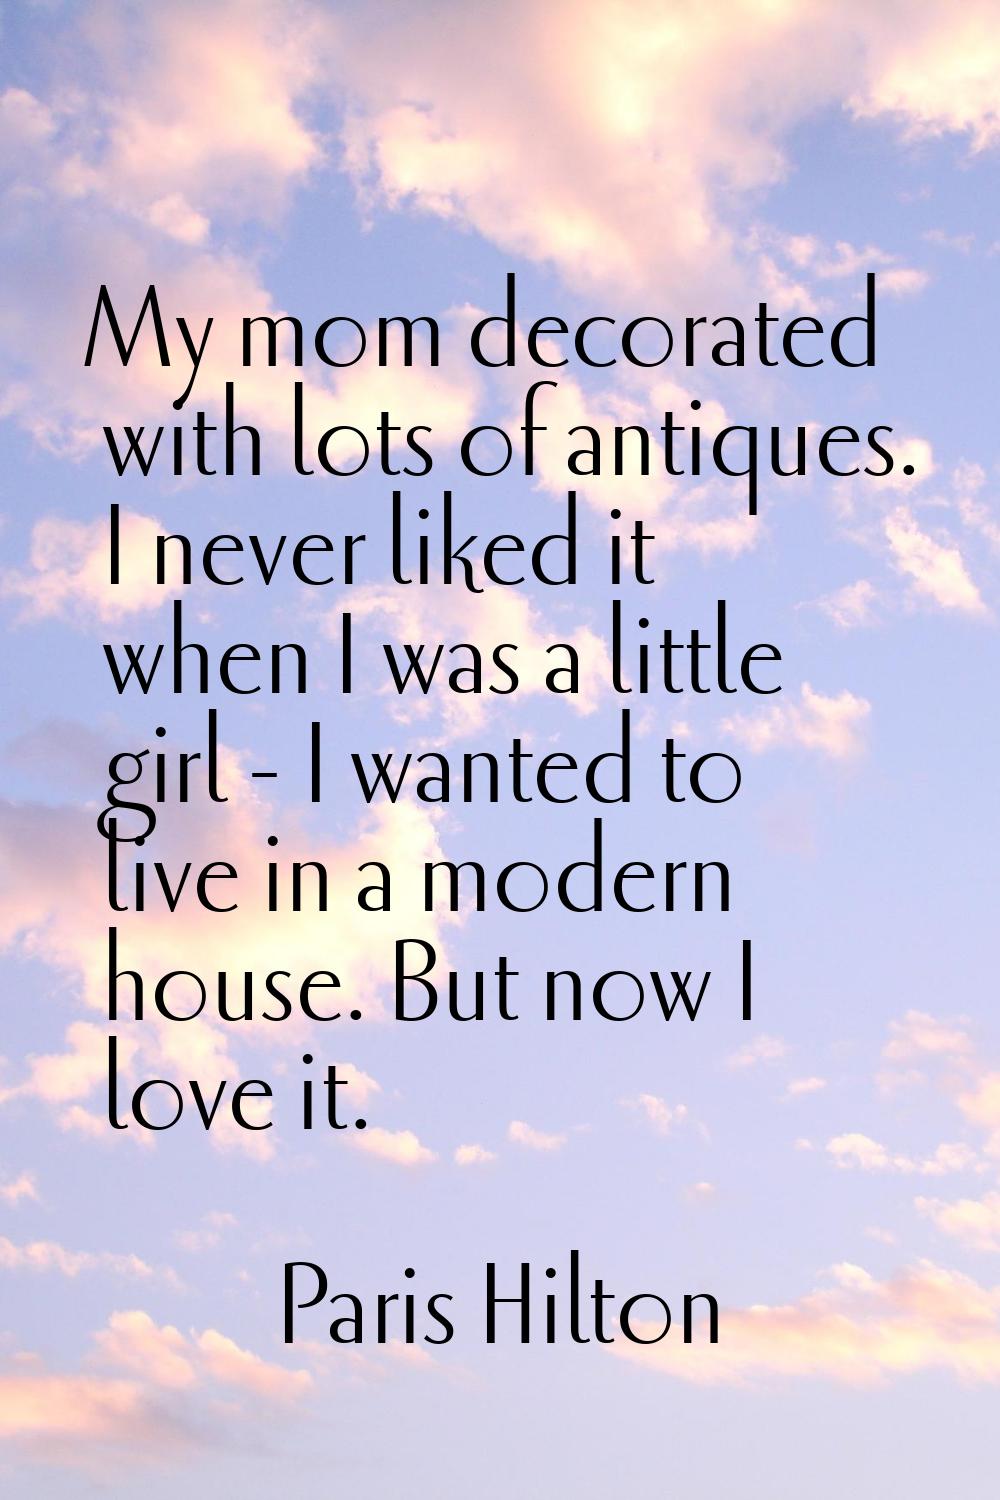 My mom decorated with lots of antiques. I never liked it when I was a little girl - I wanted to liv